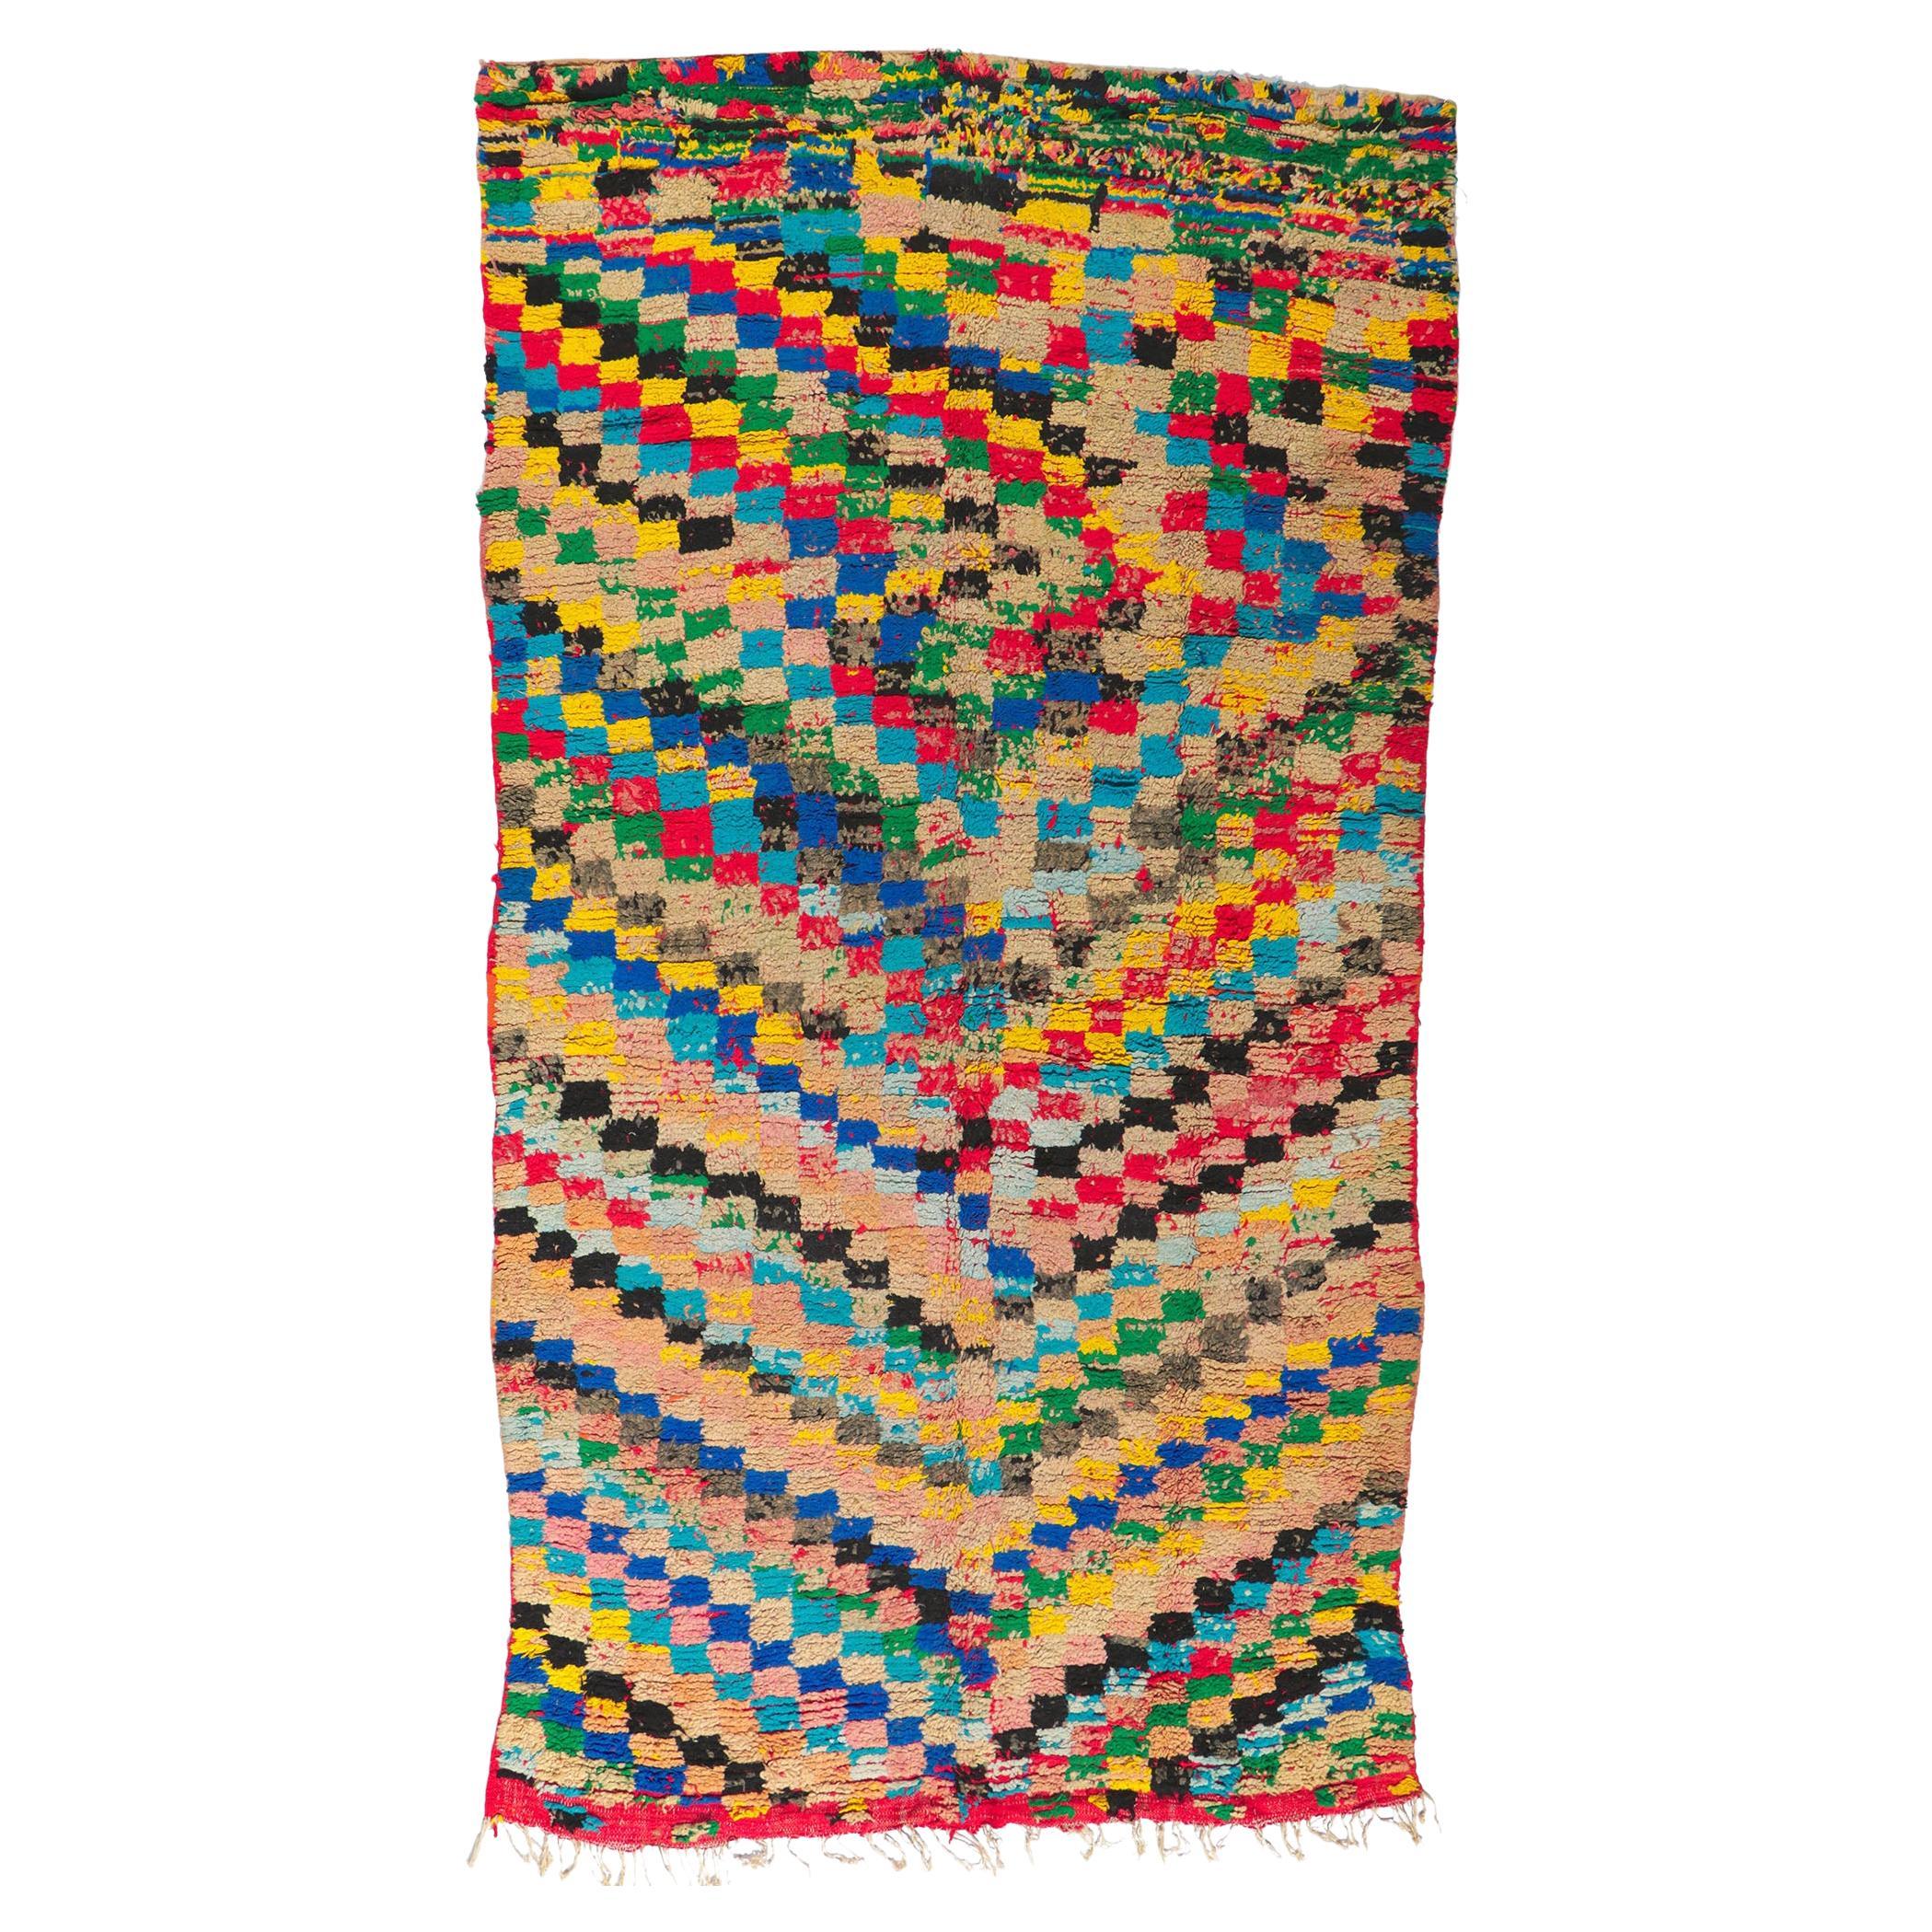 Vintage Moroccan Azilal Rug, Boho Chic Meets Cubist Style